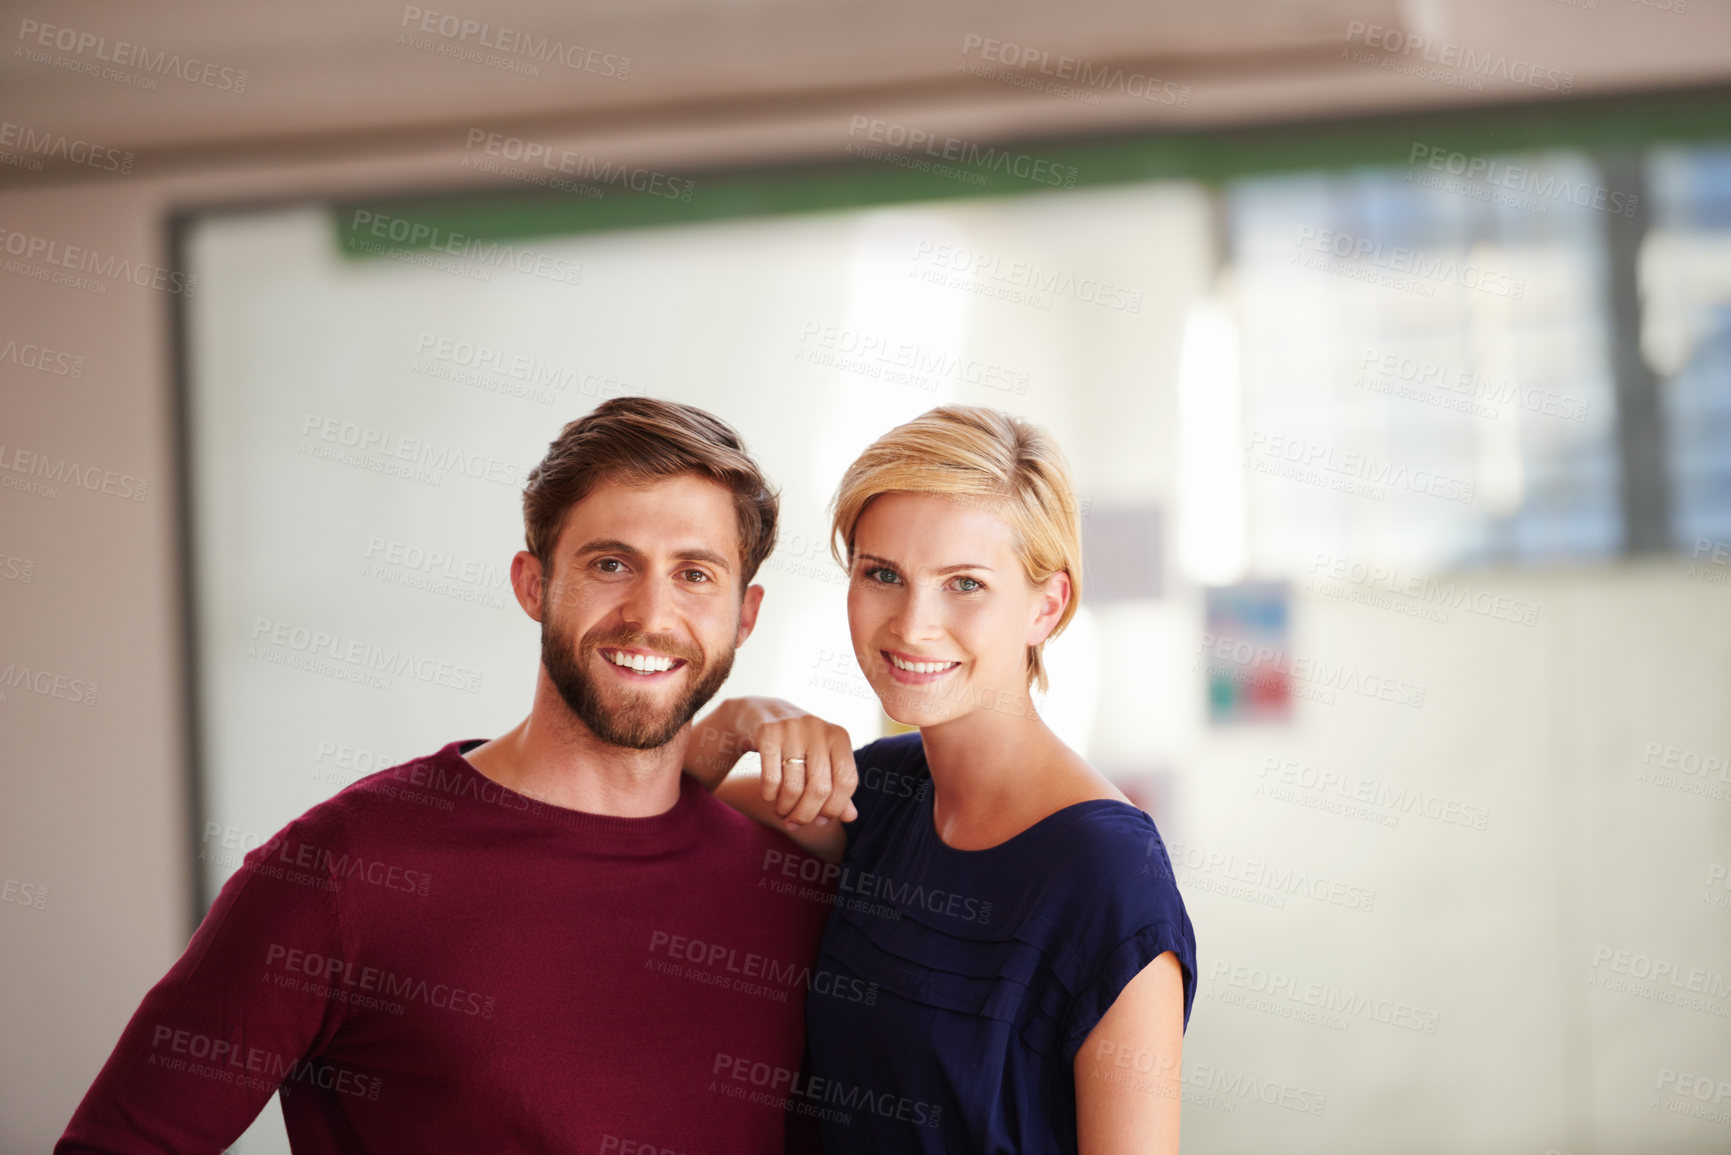 Buy stock photo Shot of a couple working together in an open office